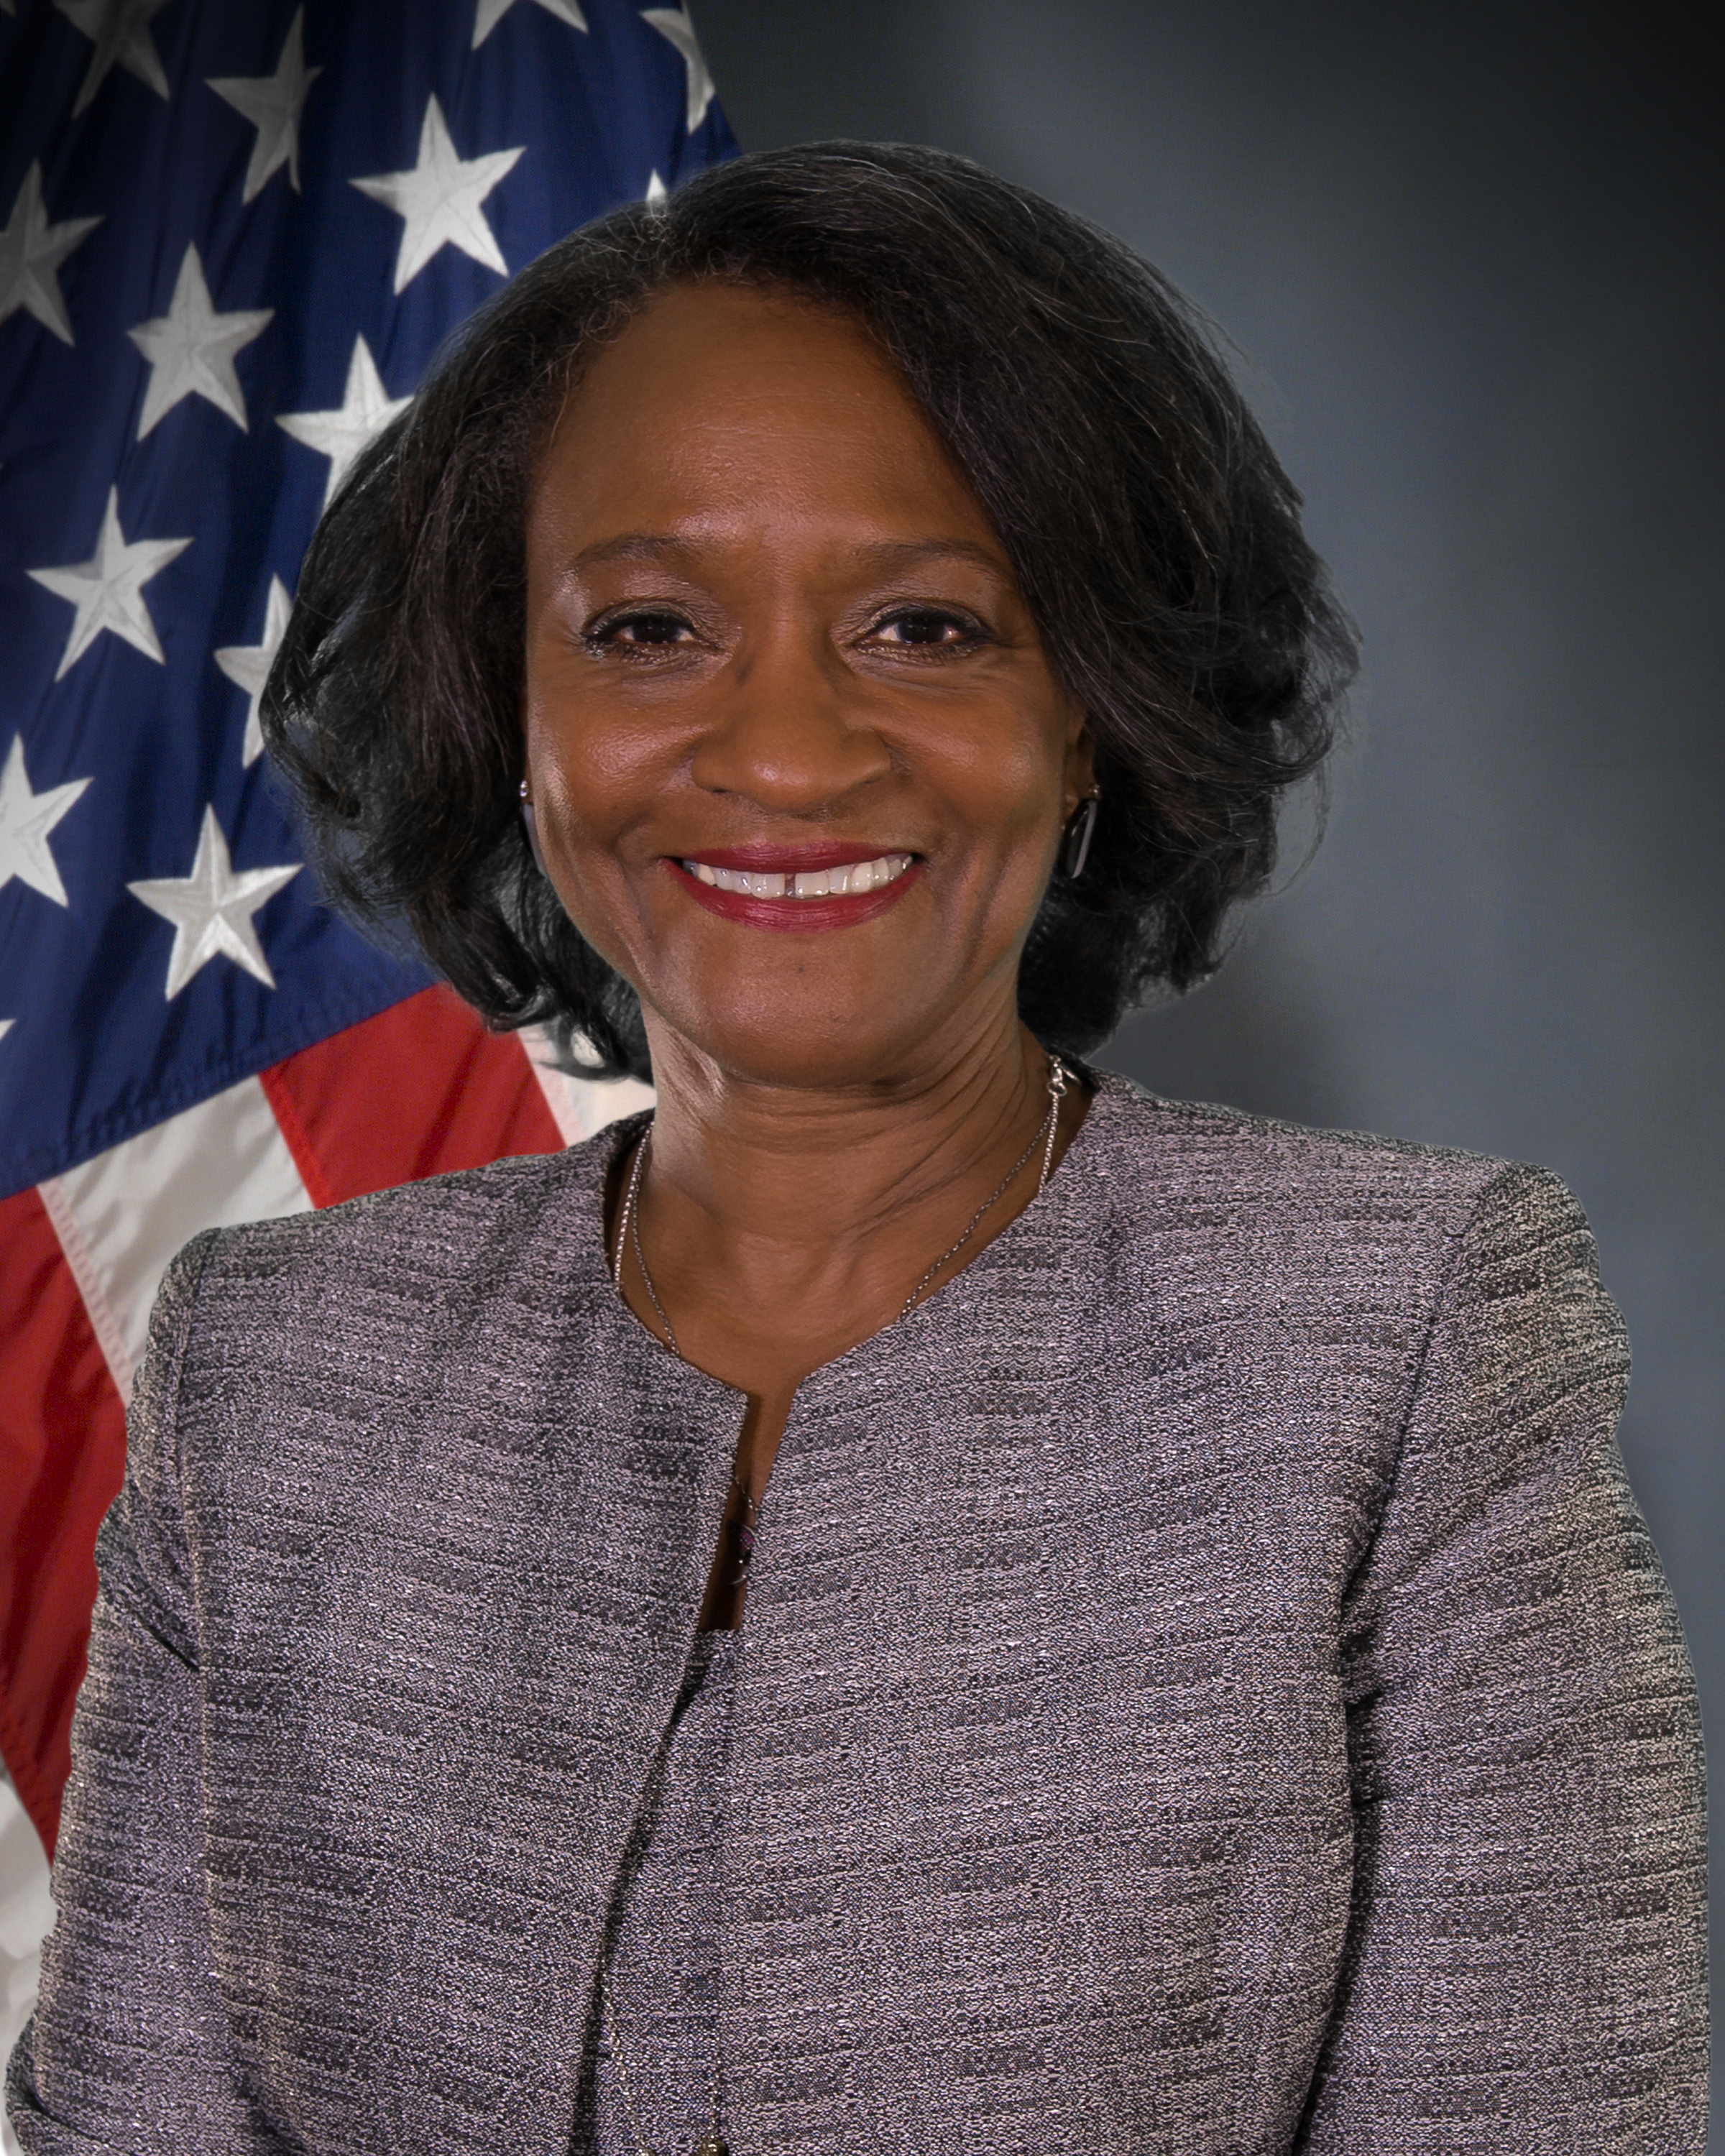 Ms. Shelia B. Taylor has been selected to serve as the State Human Resources Manager